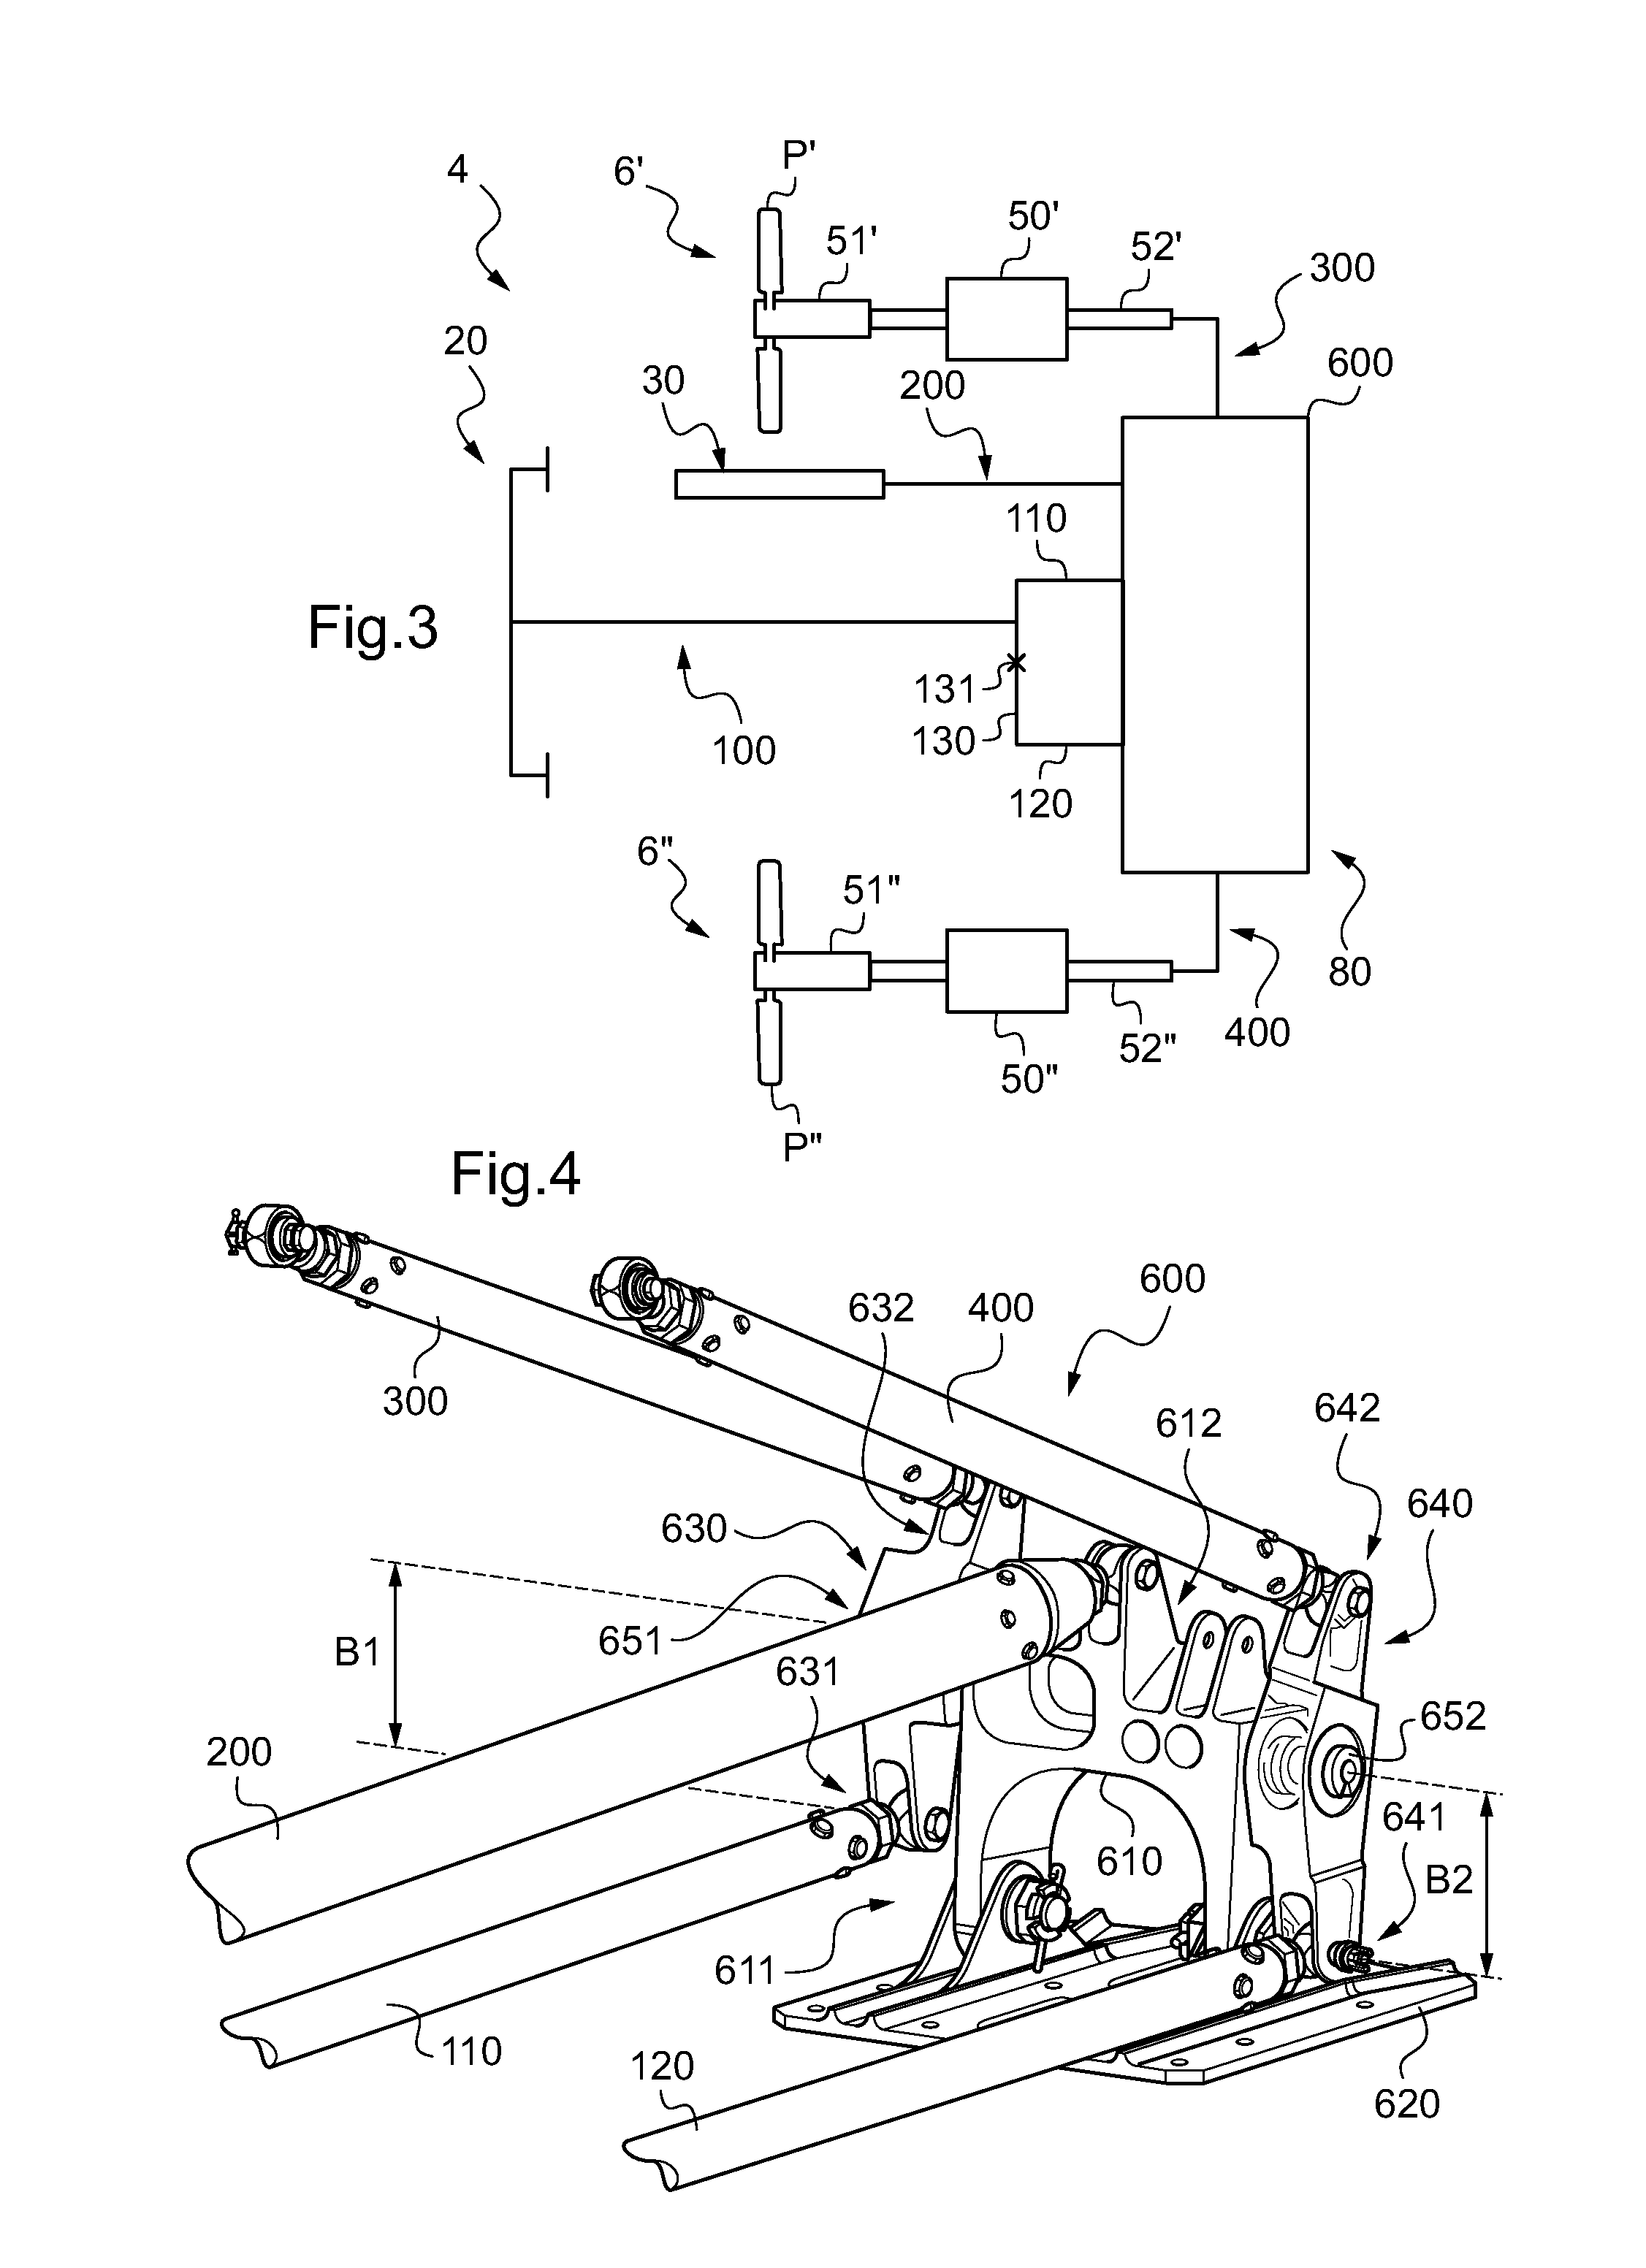 Method of controlling a hybrid helicopter in yaw, and a hybrid helicopter provided with a yaw control device suitable for implementing said method